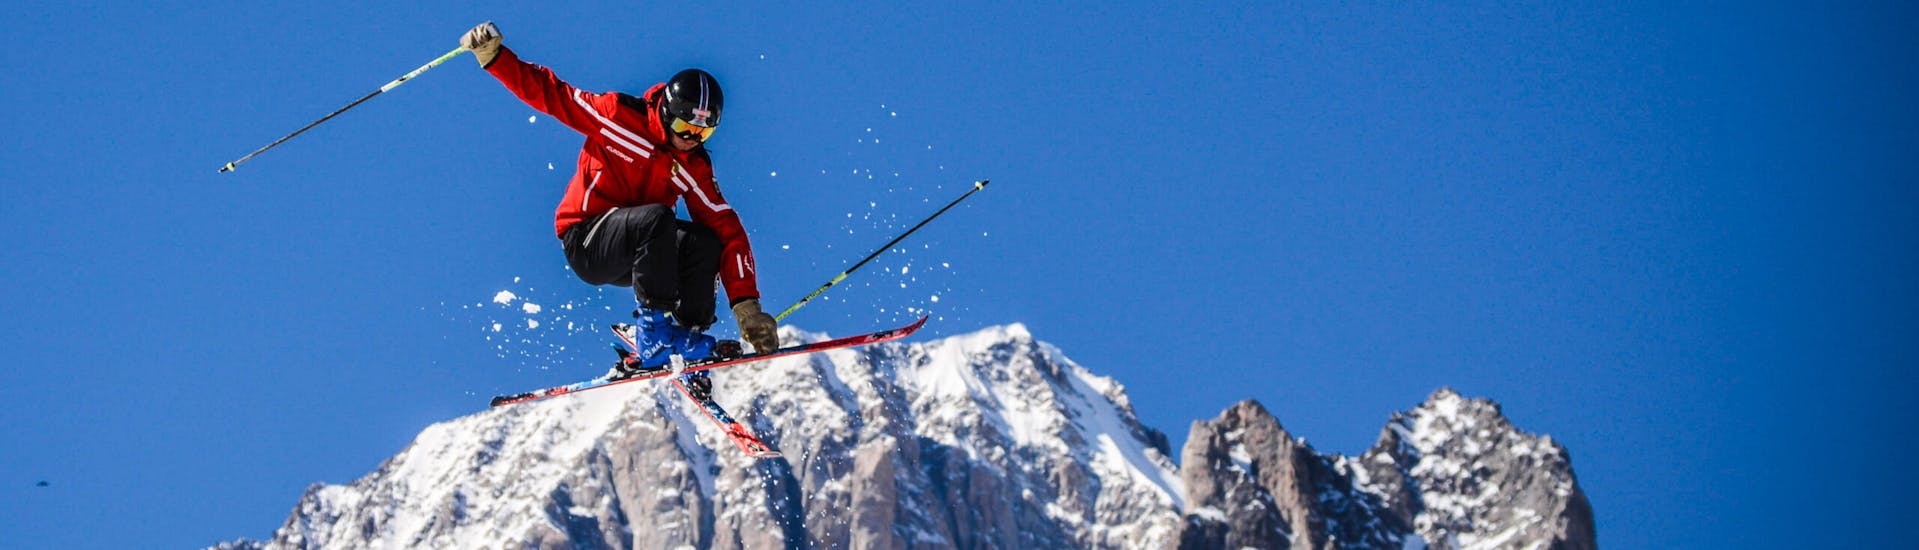 Image of an instructor from the Ski School Monte Bianco on a slope in Courmayeur.